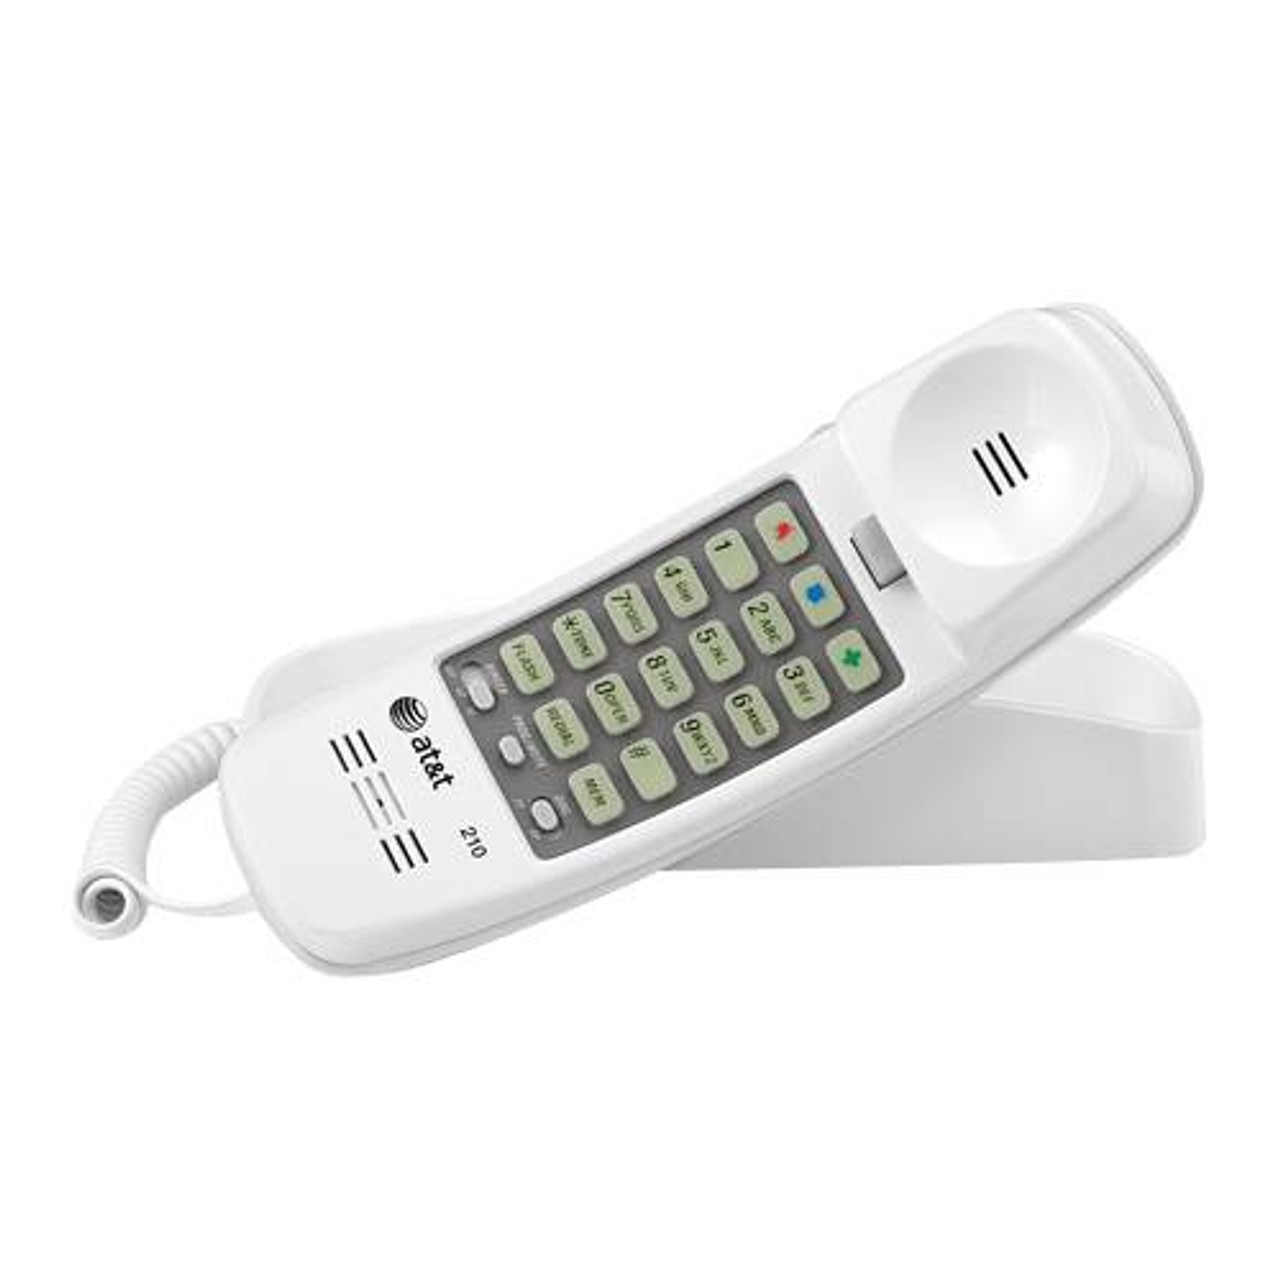 AT&T - 210M Trimline Corded Telephone - White